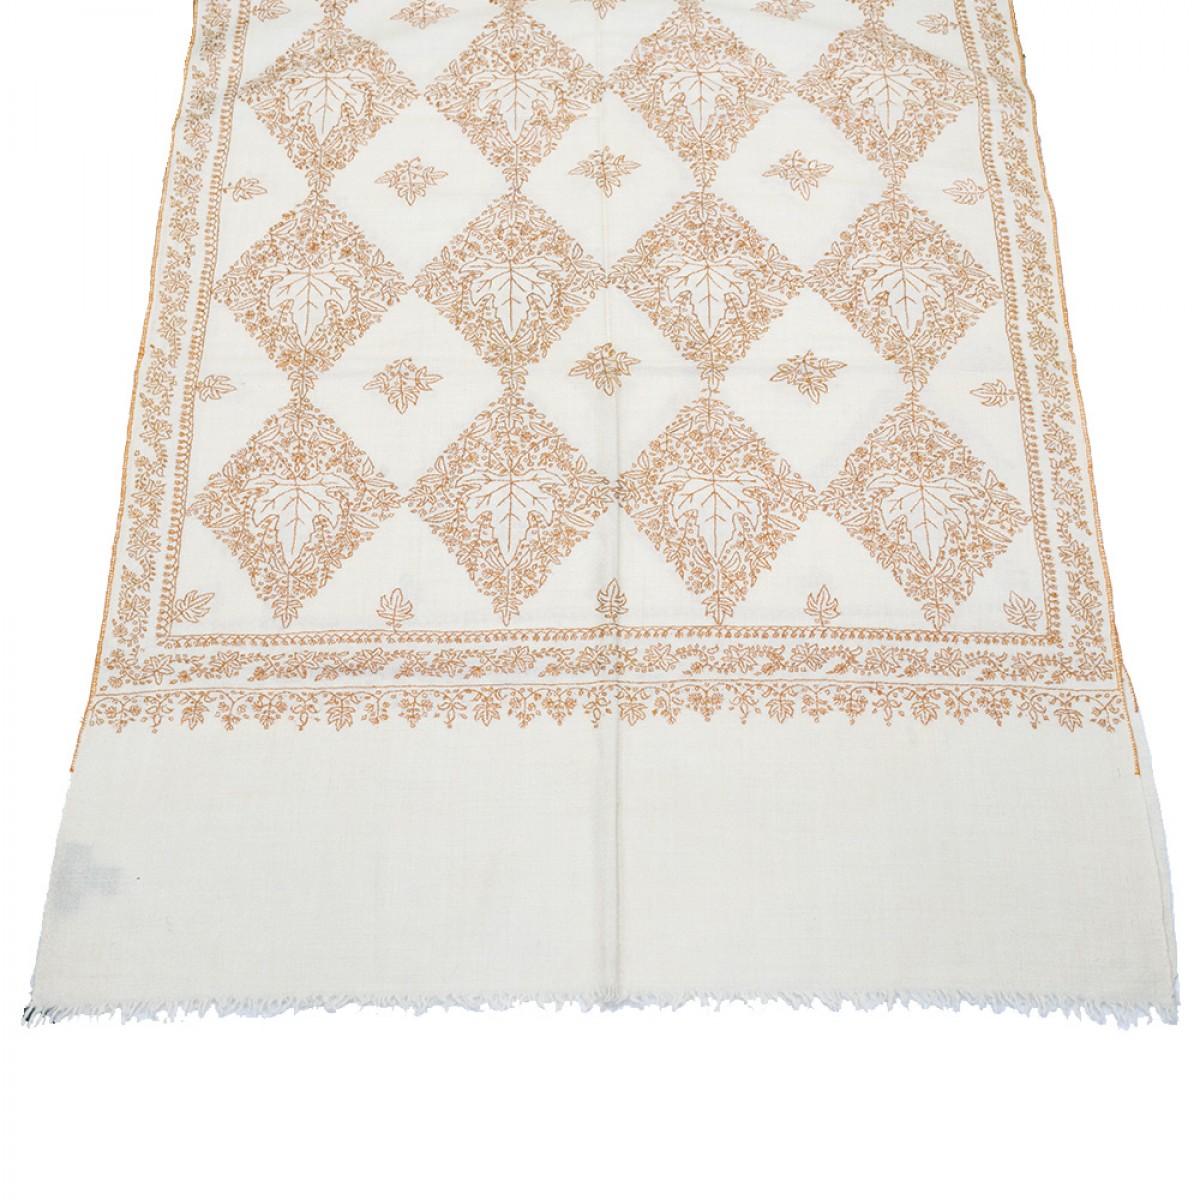 Embroidered Pashmina Stole - Chinar Leaf Natural 